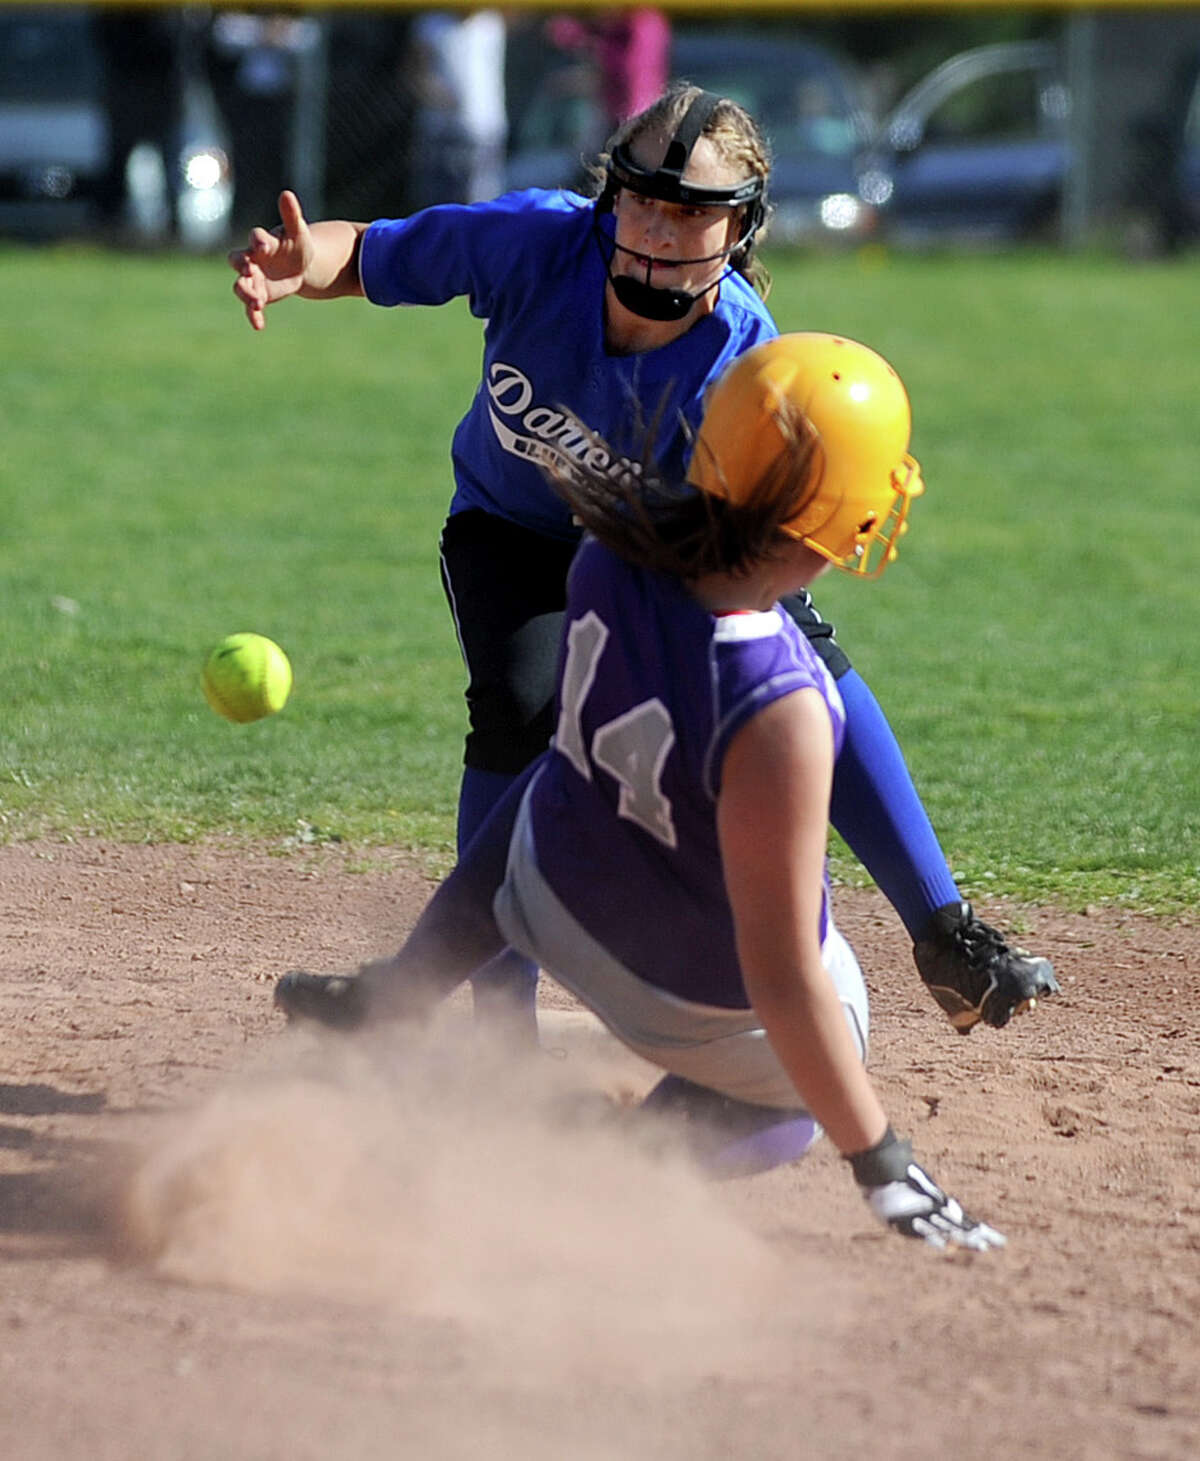 Darien's Erika Osherow reaches for the ball as Westhill's Cassandra Kish slides into second base during Friday's softball game at Westhill High School in Stamford on April 13, 2012.